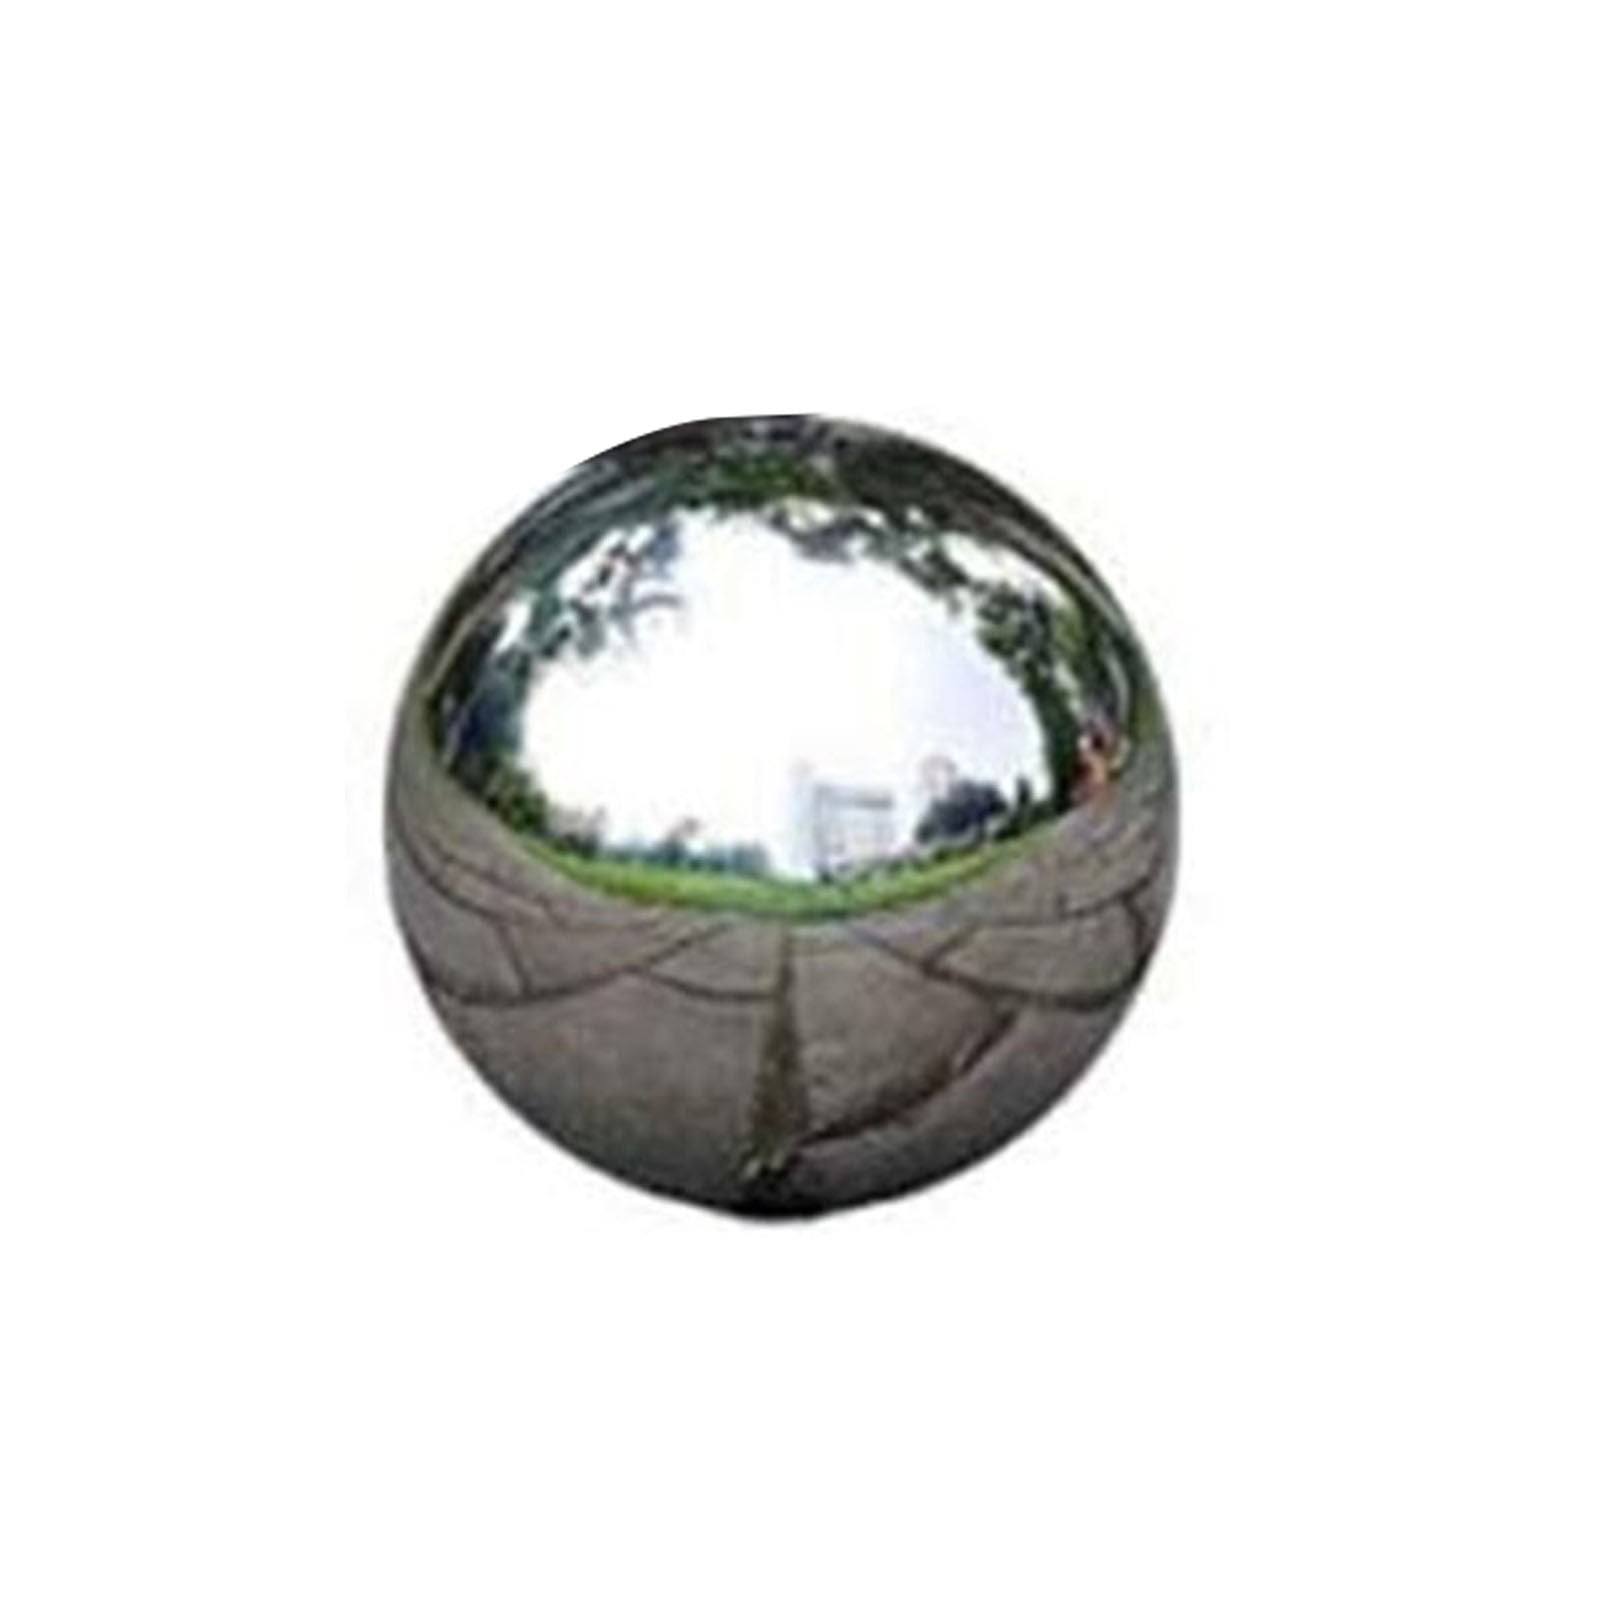 Stainless Steel Gazing Globe 12 Inch Durable Stainless Steel Gazing Ball Gazing Globe Mirror Ball Garden Sphere Metal Outdoor Mirrors Gazing Balls for Gardens On Clearance Home Ornament Decorations 5i